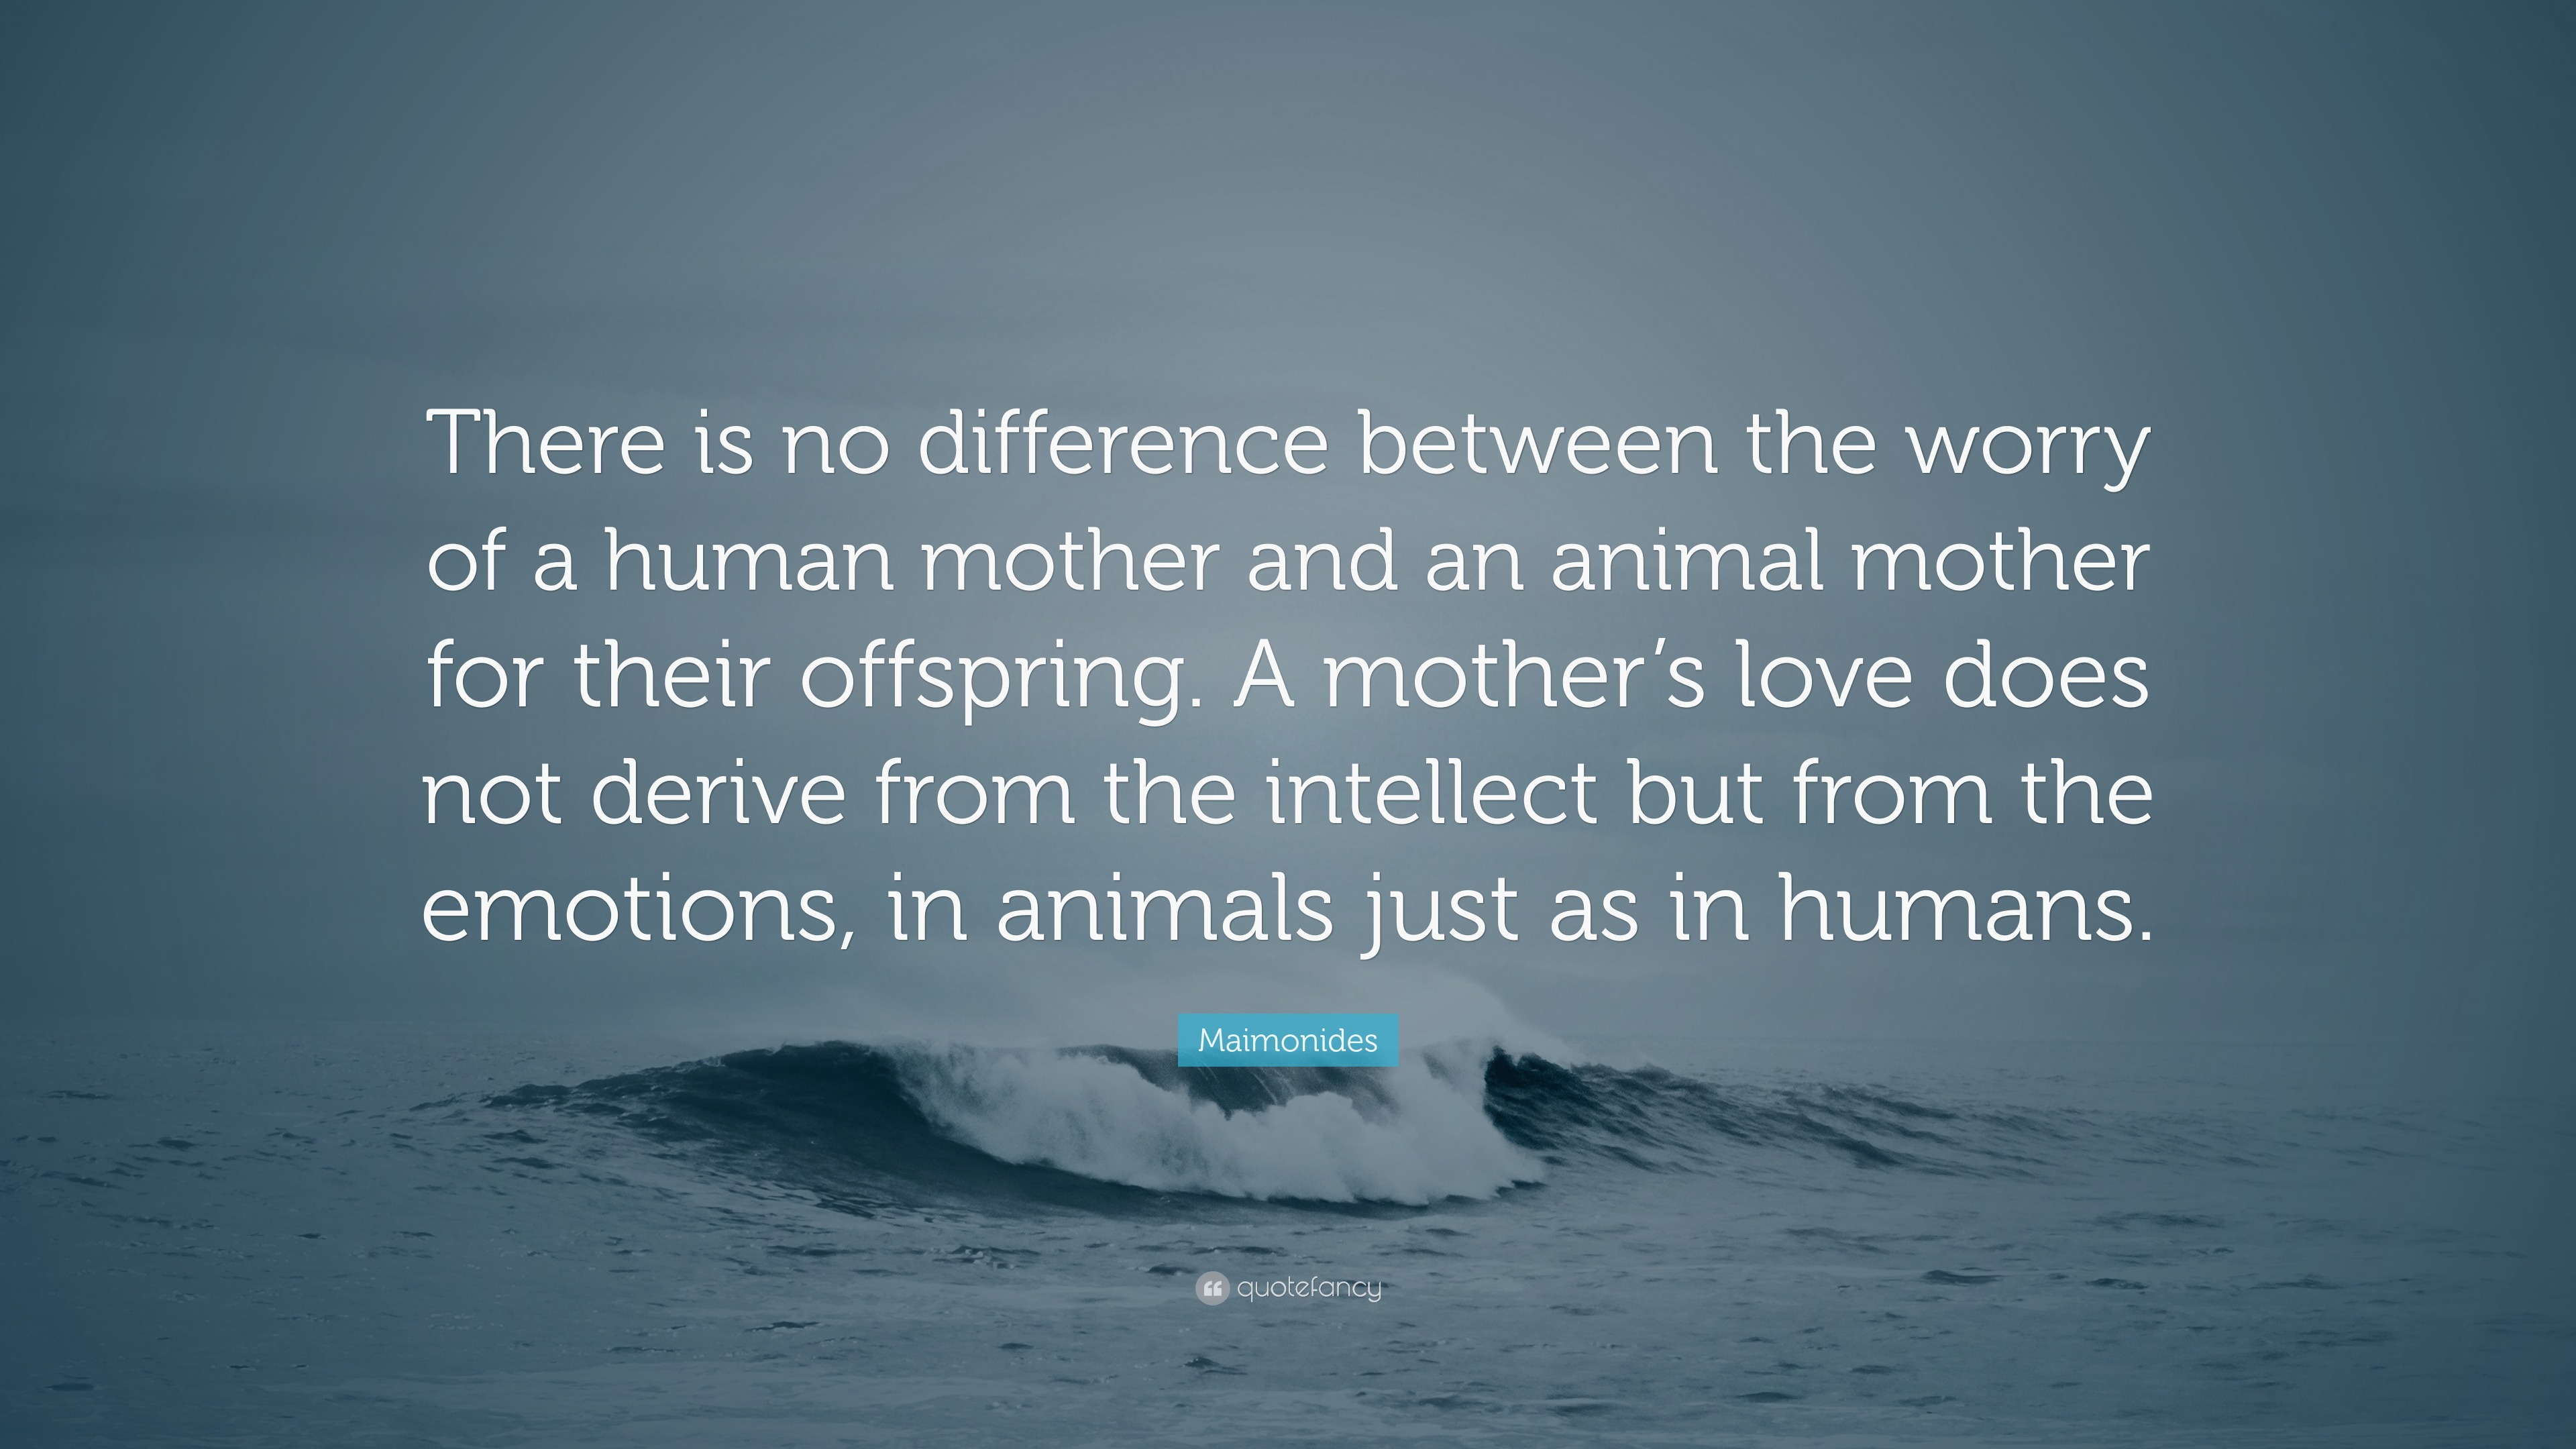 Maimonides Quote: “There is no difference between the worry of a human  mother and an animal mother for their offspring. A mother's love doe...”